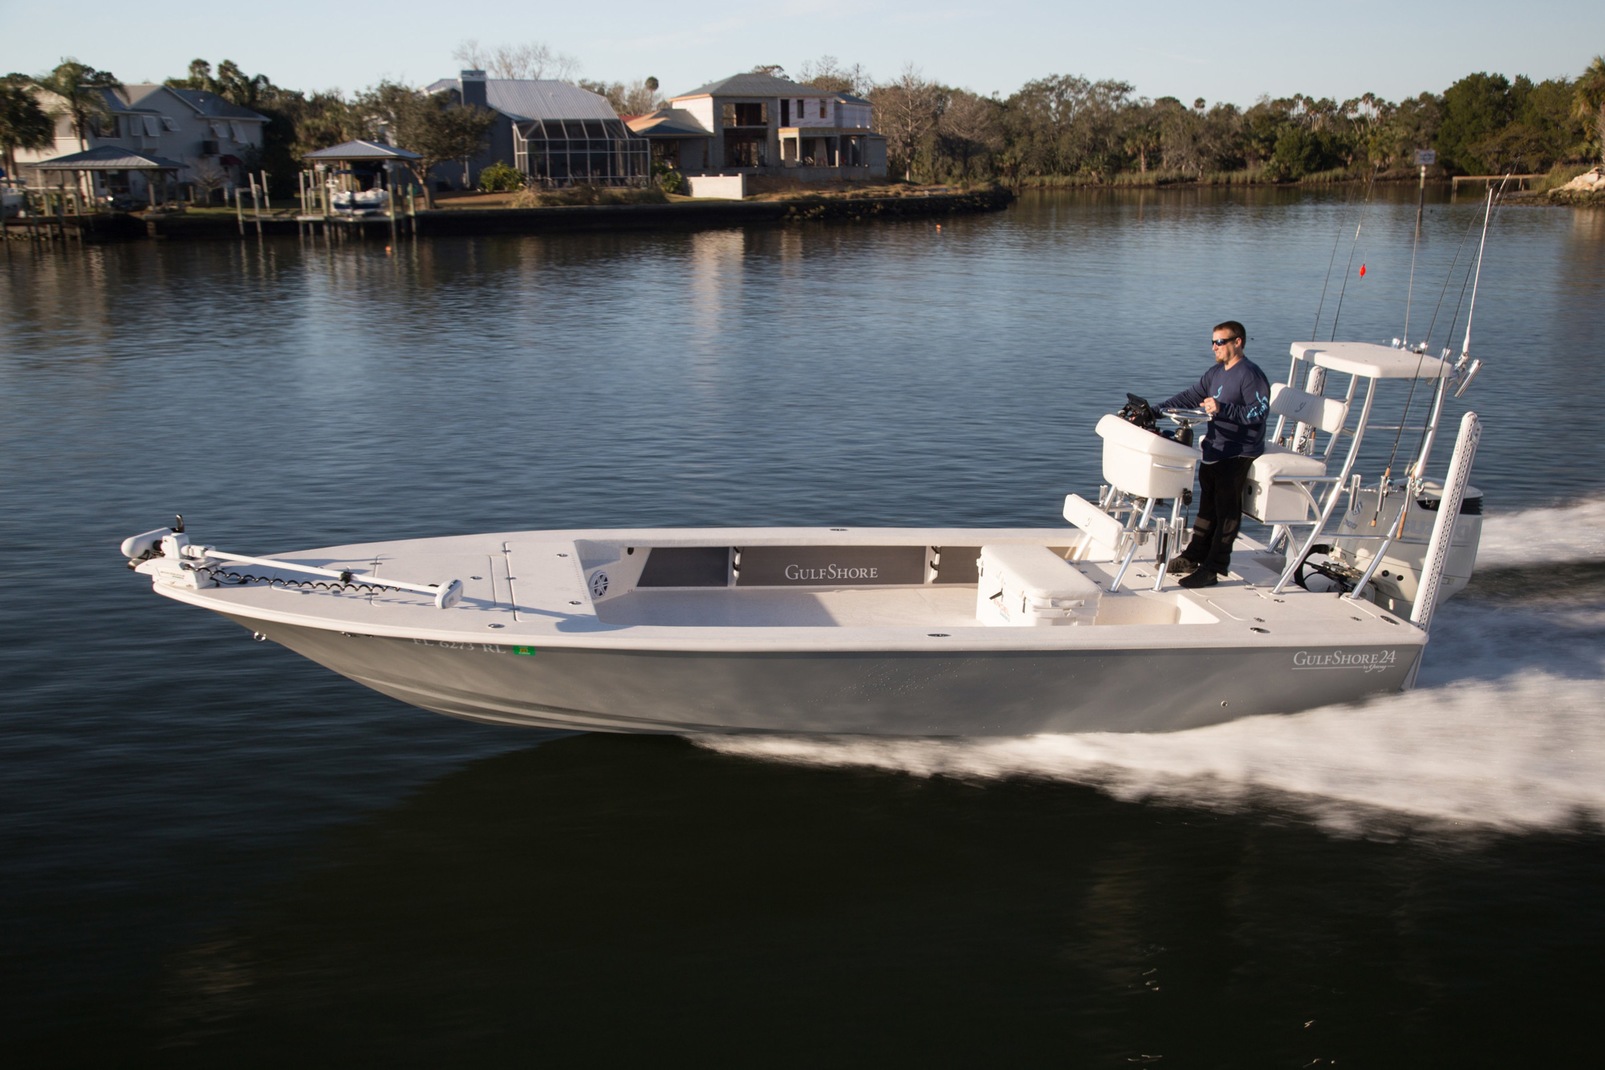 4 Important Features to Look for in an Inshore Fishing Boat